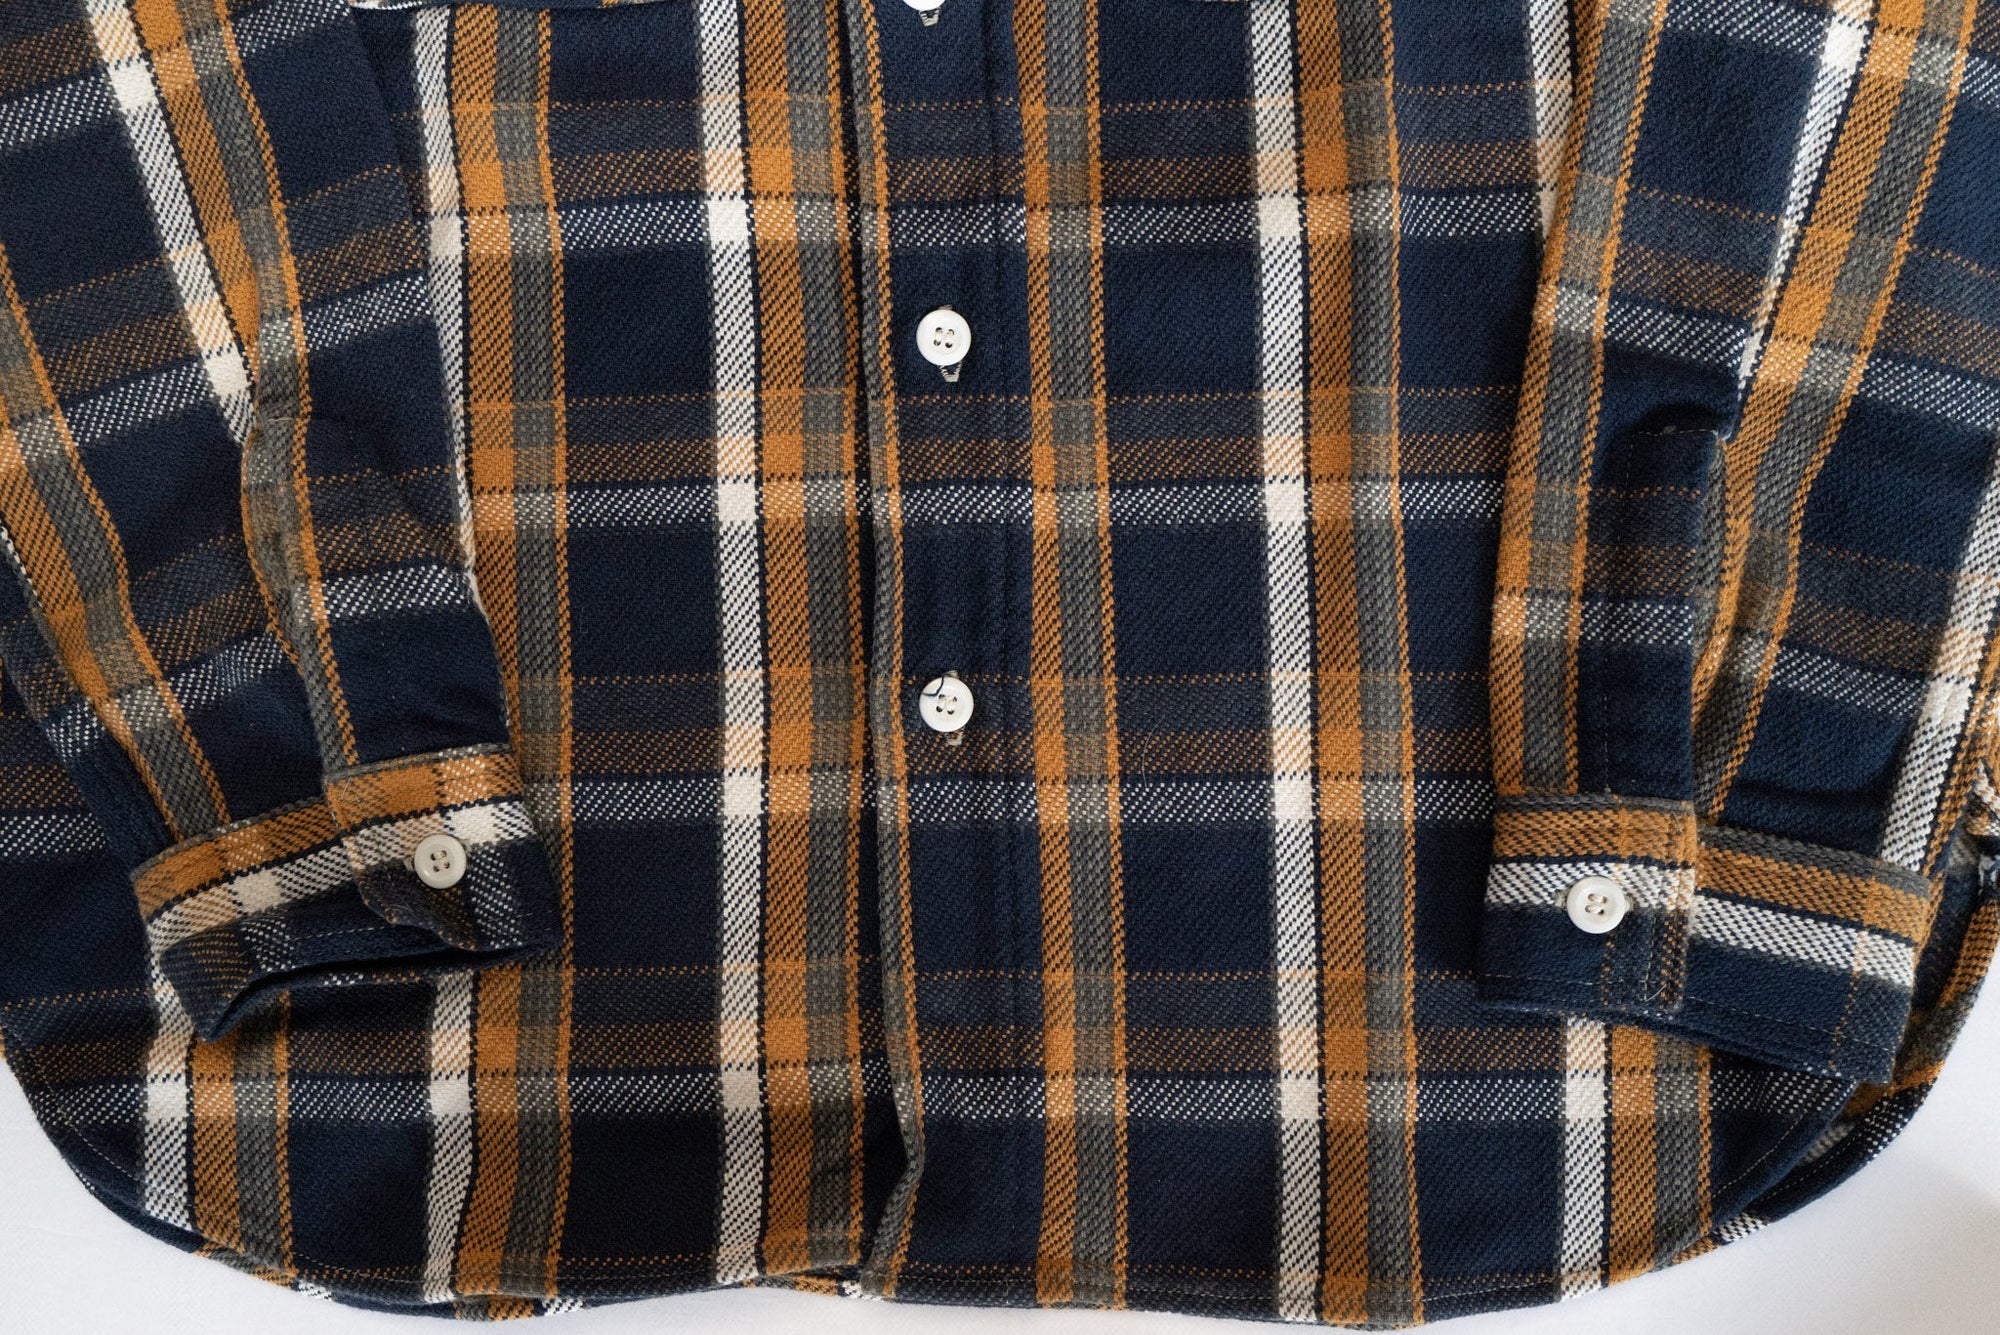 Warehouse Co. LOT.3104 Type B Selvage Flannel Workshirt (Tiger Yellow)